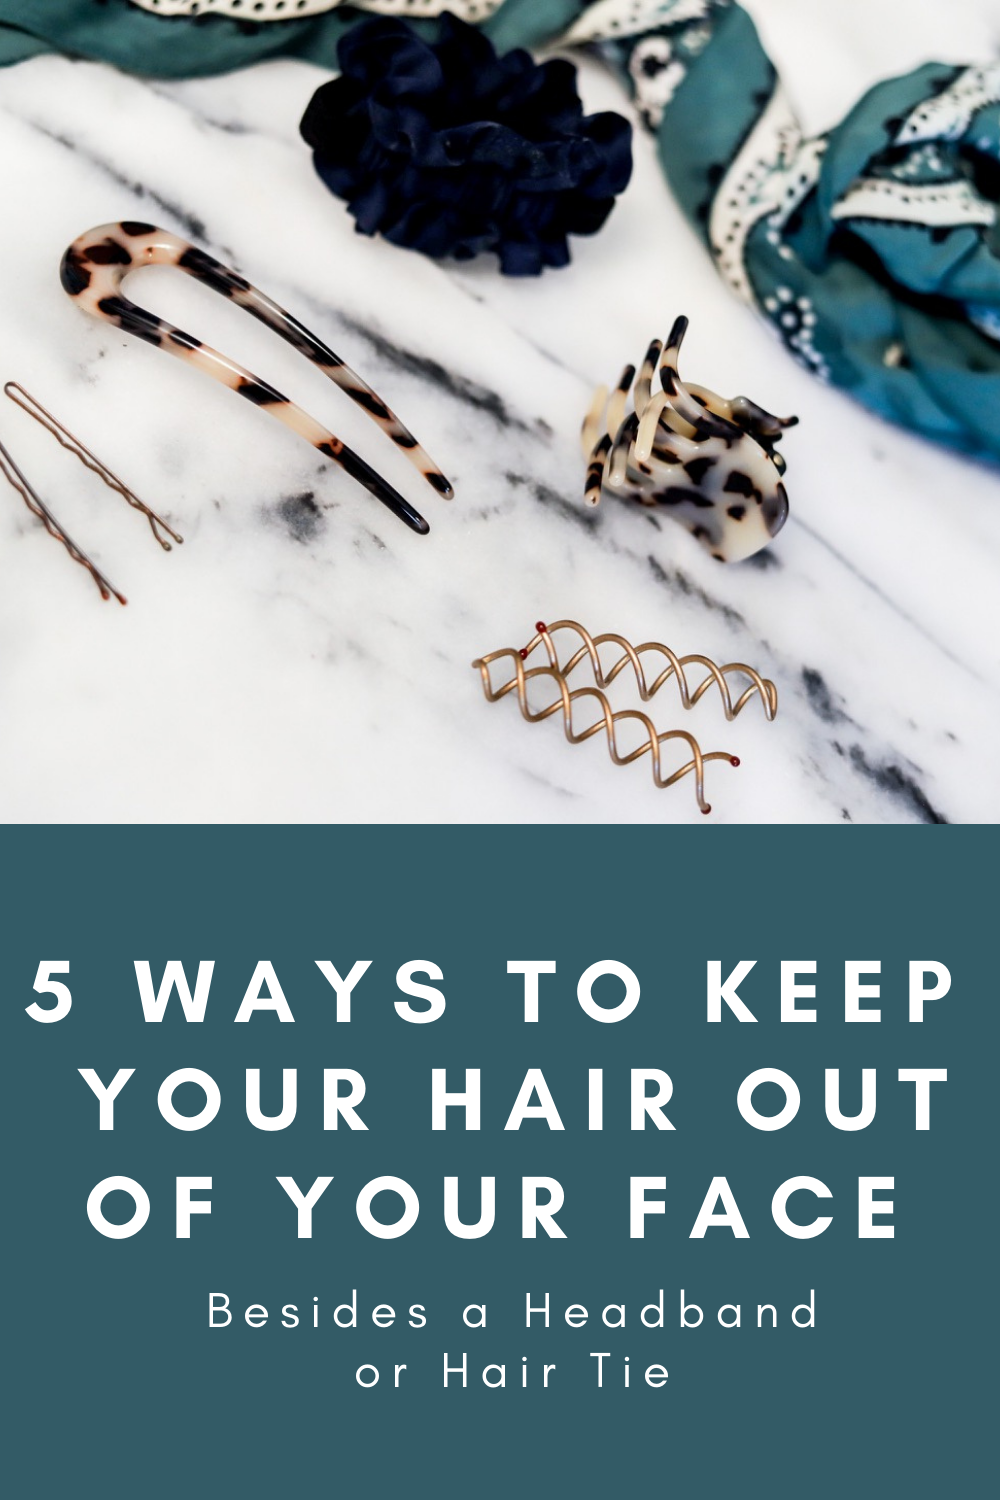 5 Ways to Keep Your Hair Out of Your Face Besides a Headband or Hair Tie |  LMents of Style | Fashion & Lifestyle Blog